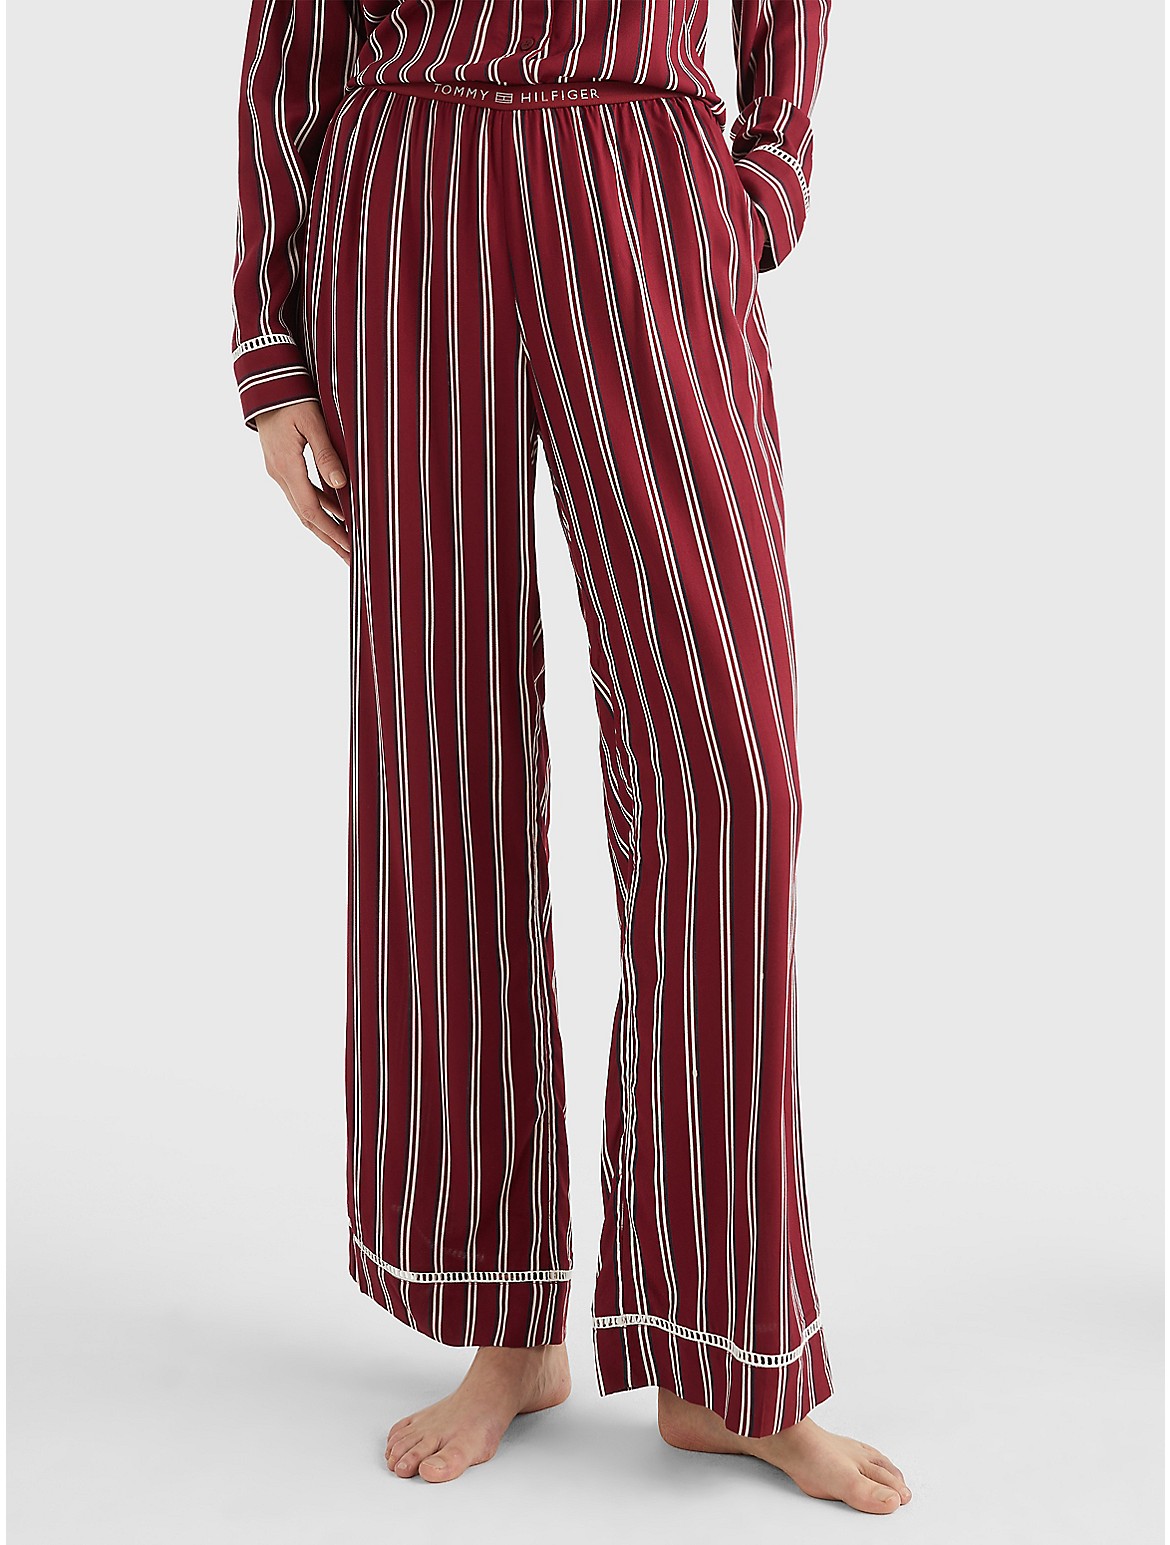 Tommy Hilfiger Women's Stripe Pajama Pant - Red - S